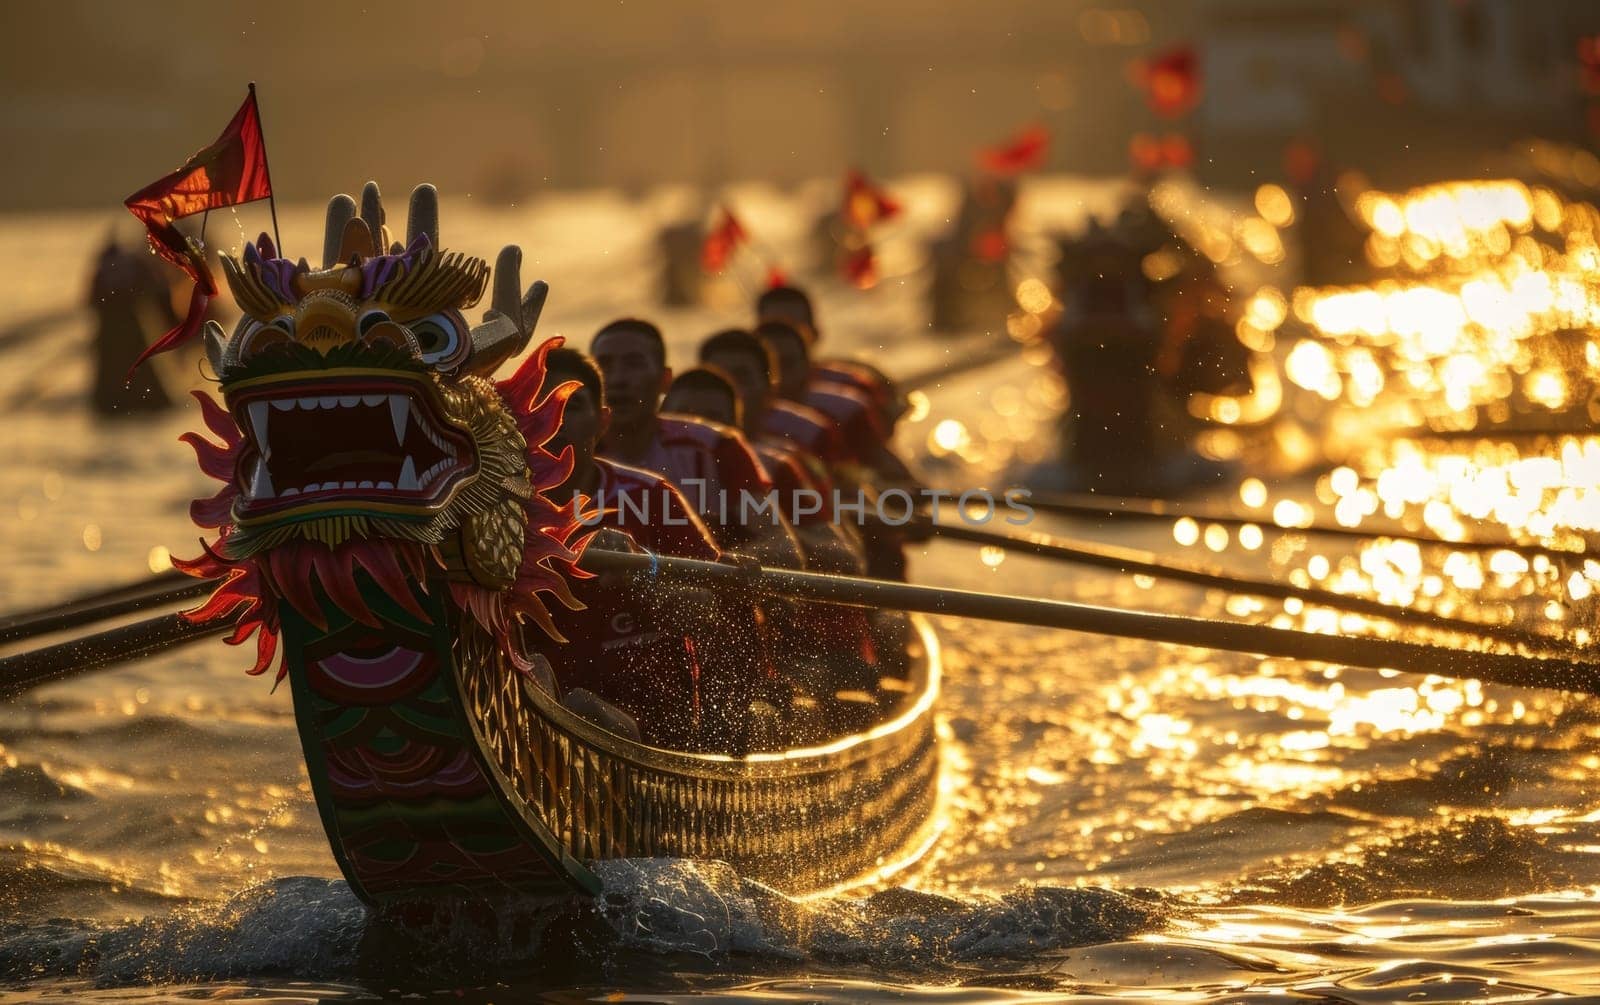 The golden hour illuminates a dragon boat race, with rowers in sync and water sparkling, capturing the spirit of this vibrant cultural event